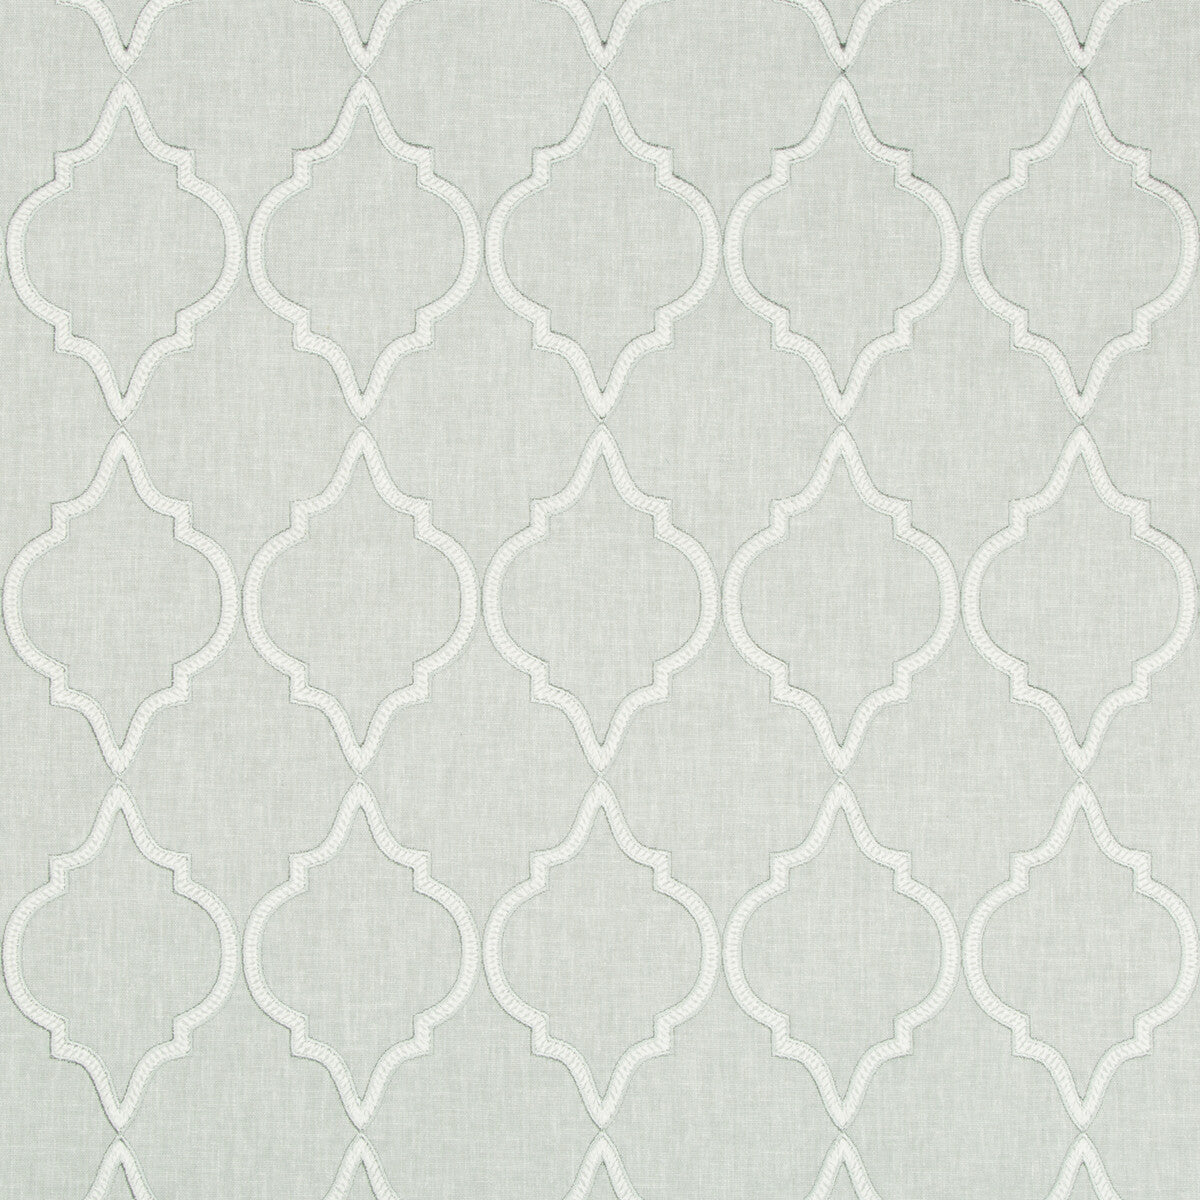 Highhope fabric in mineral color - pattern 35301.11.0 - by Kravet Basics in the Greenwich collection